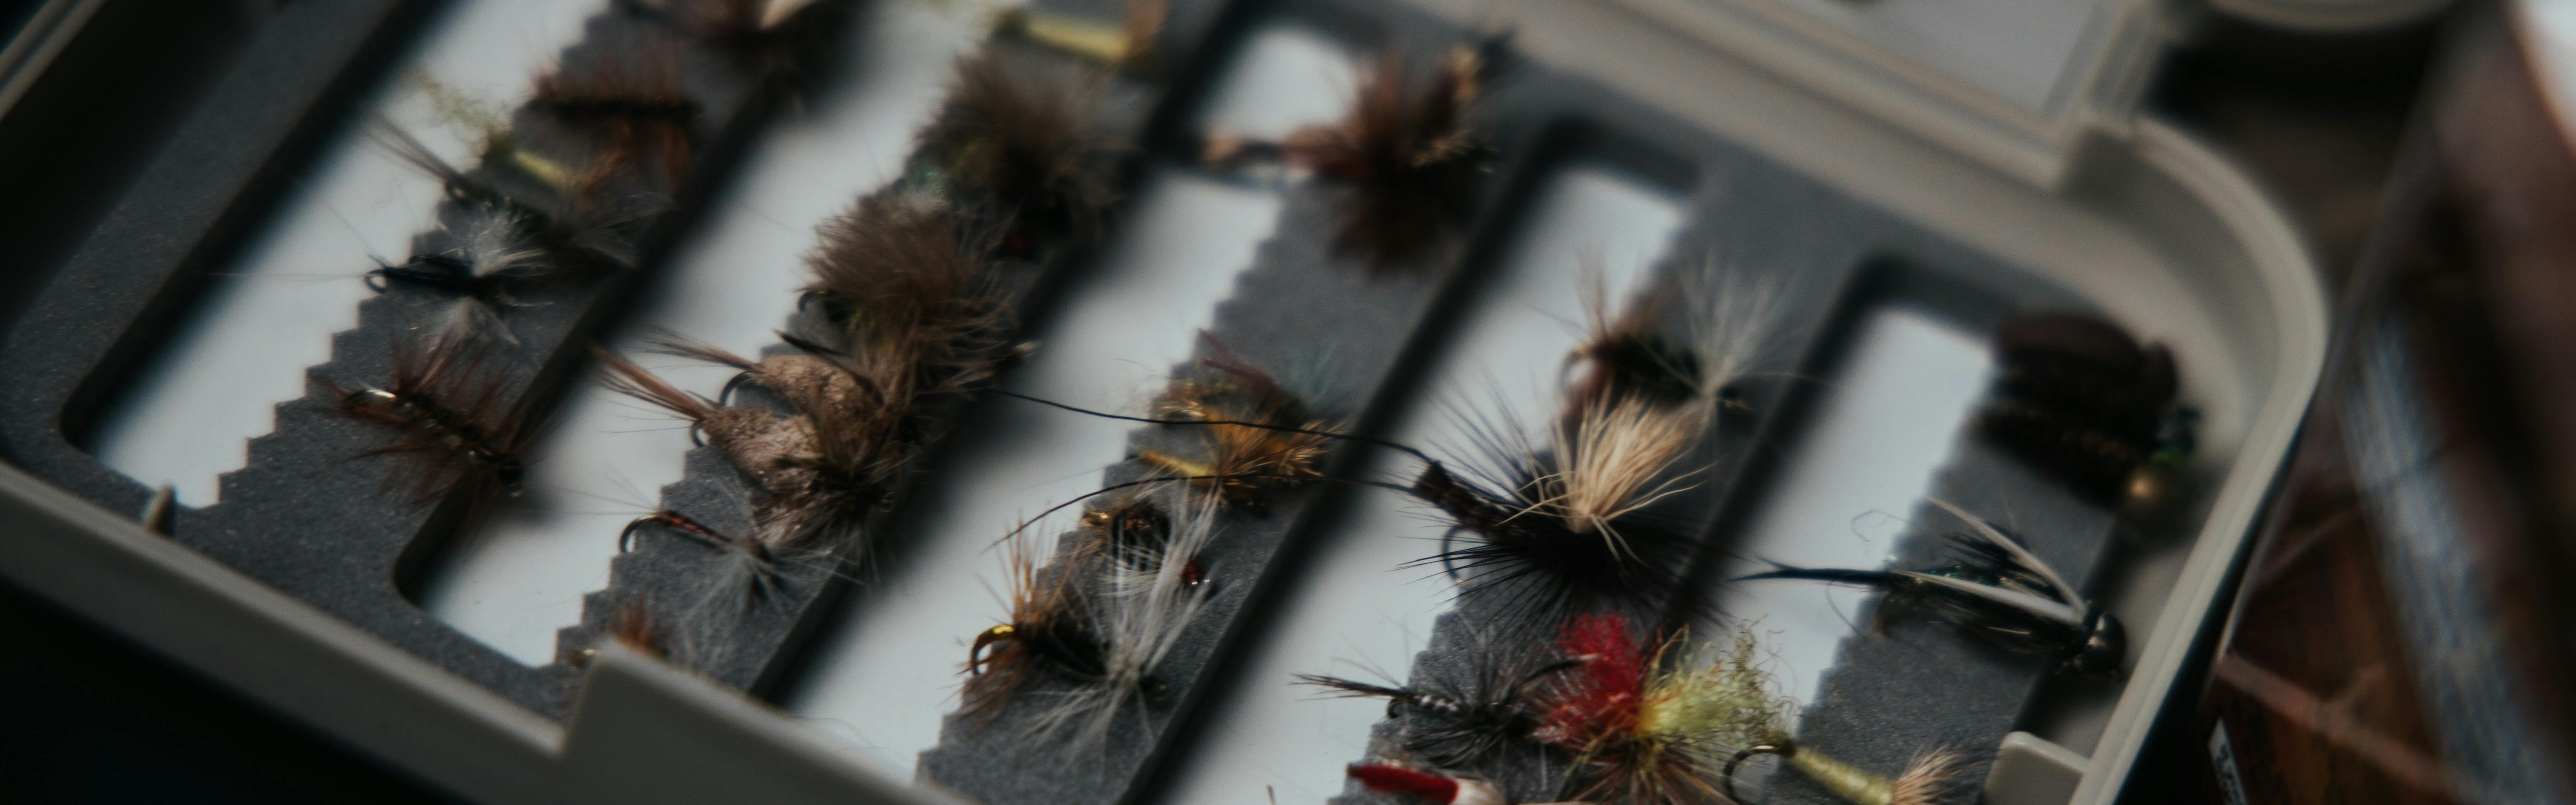 10 Best Fishing Flies for Trout in the Summer - The Fly Crate